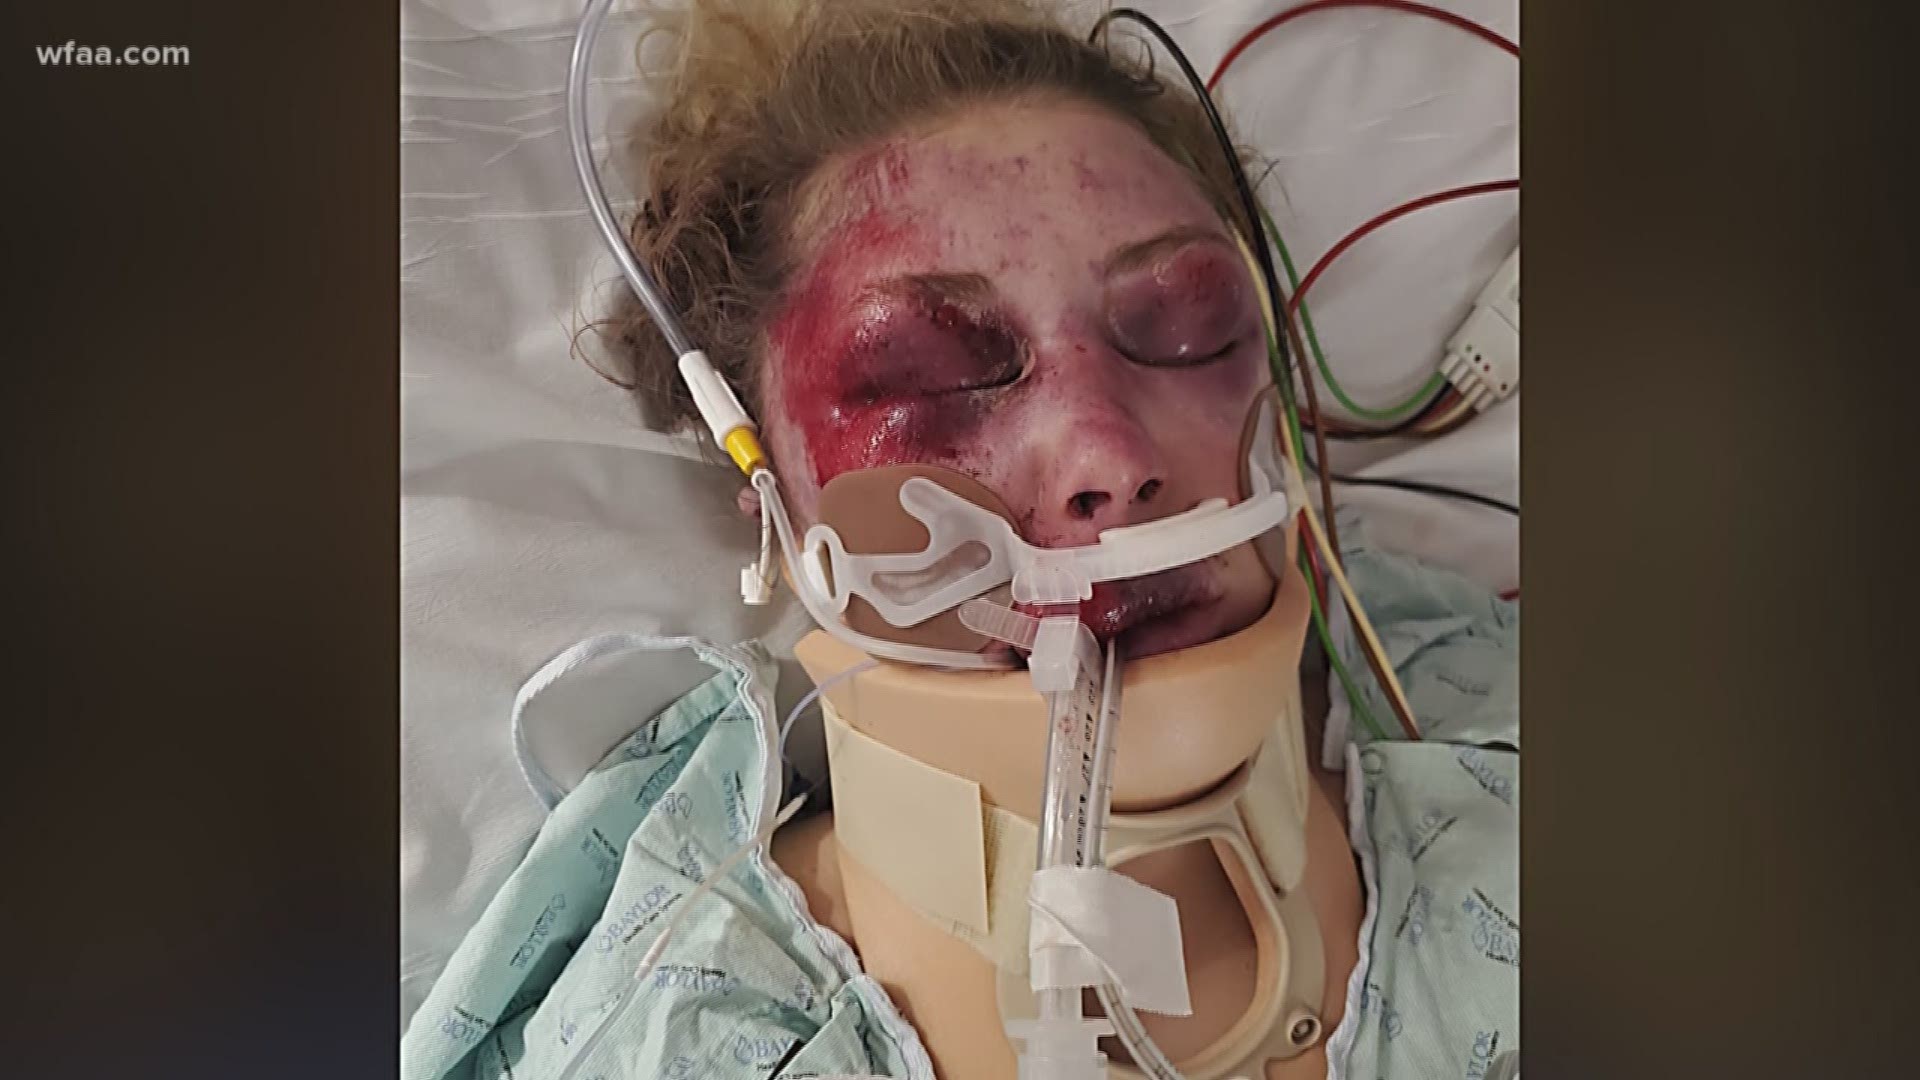 Jonna King, 27, was beaten with a fire extinguisher and carjacked by a total stranger following a shift at the Dallas hotel.